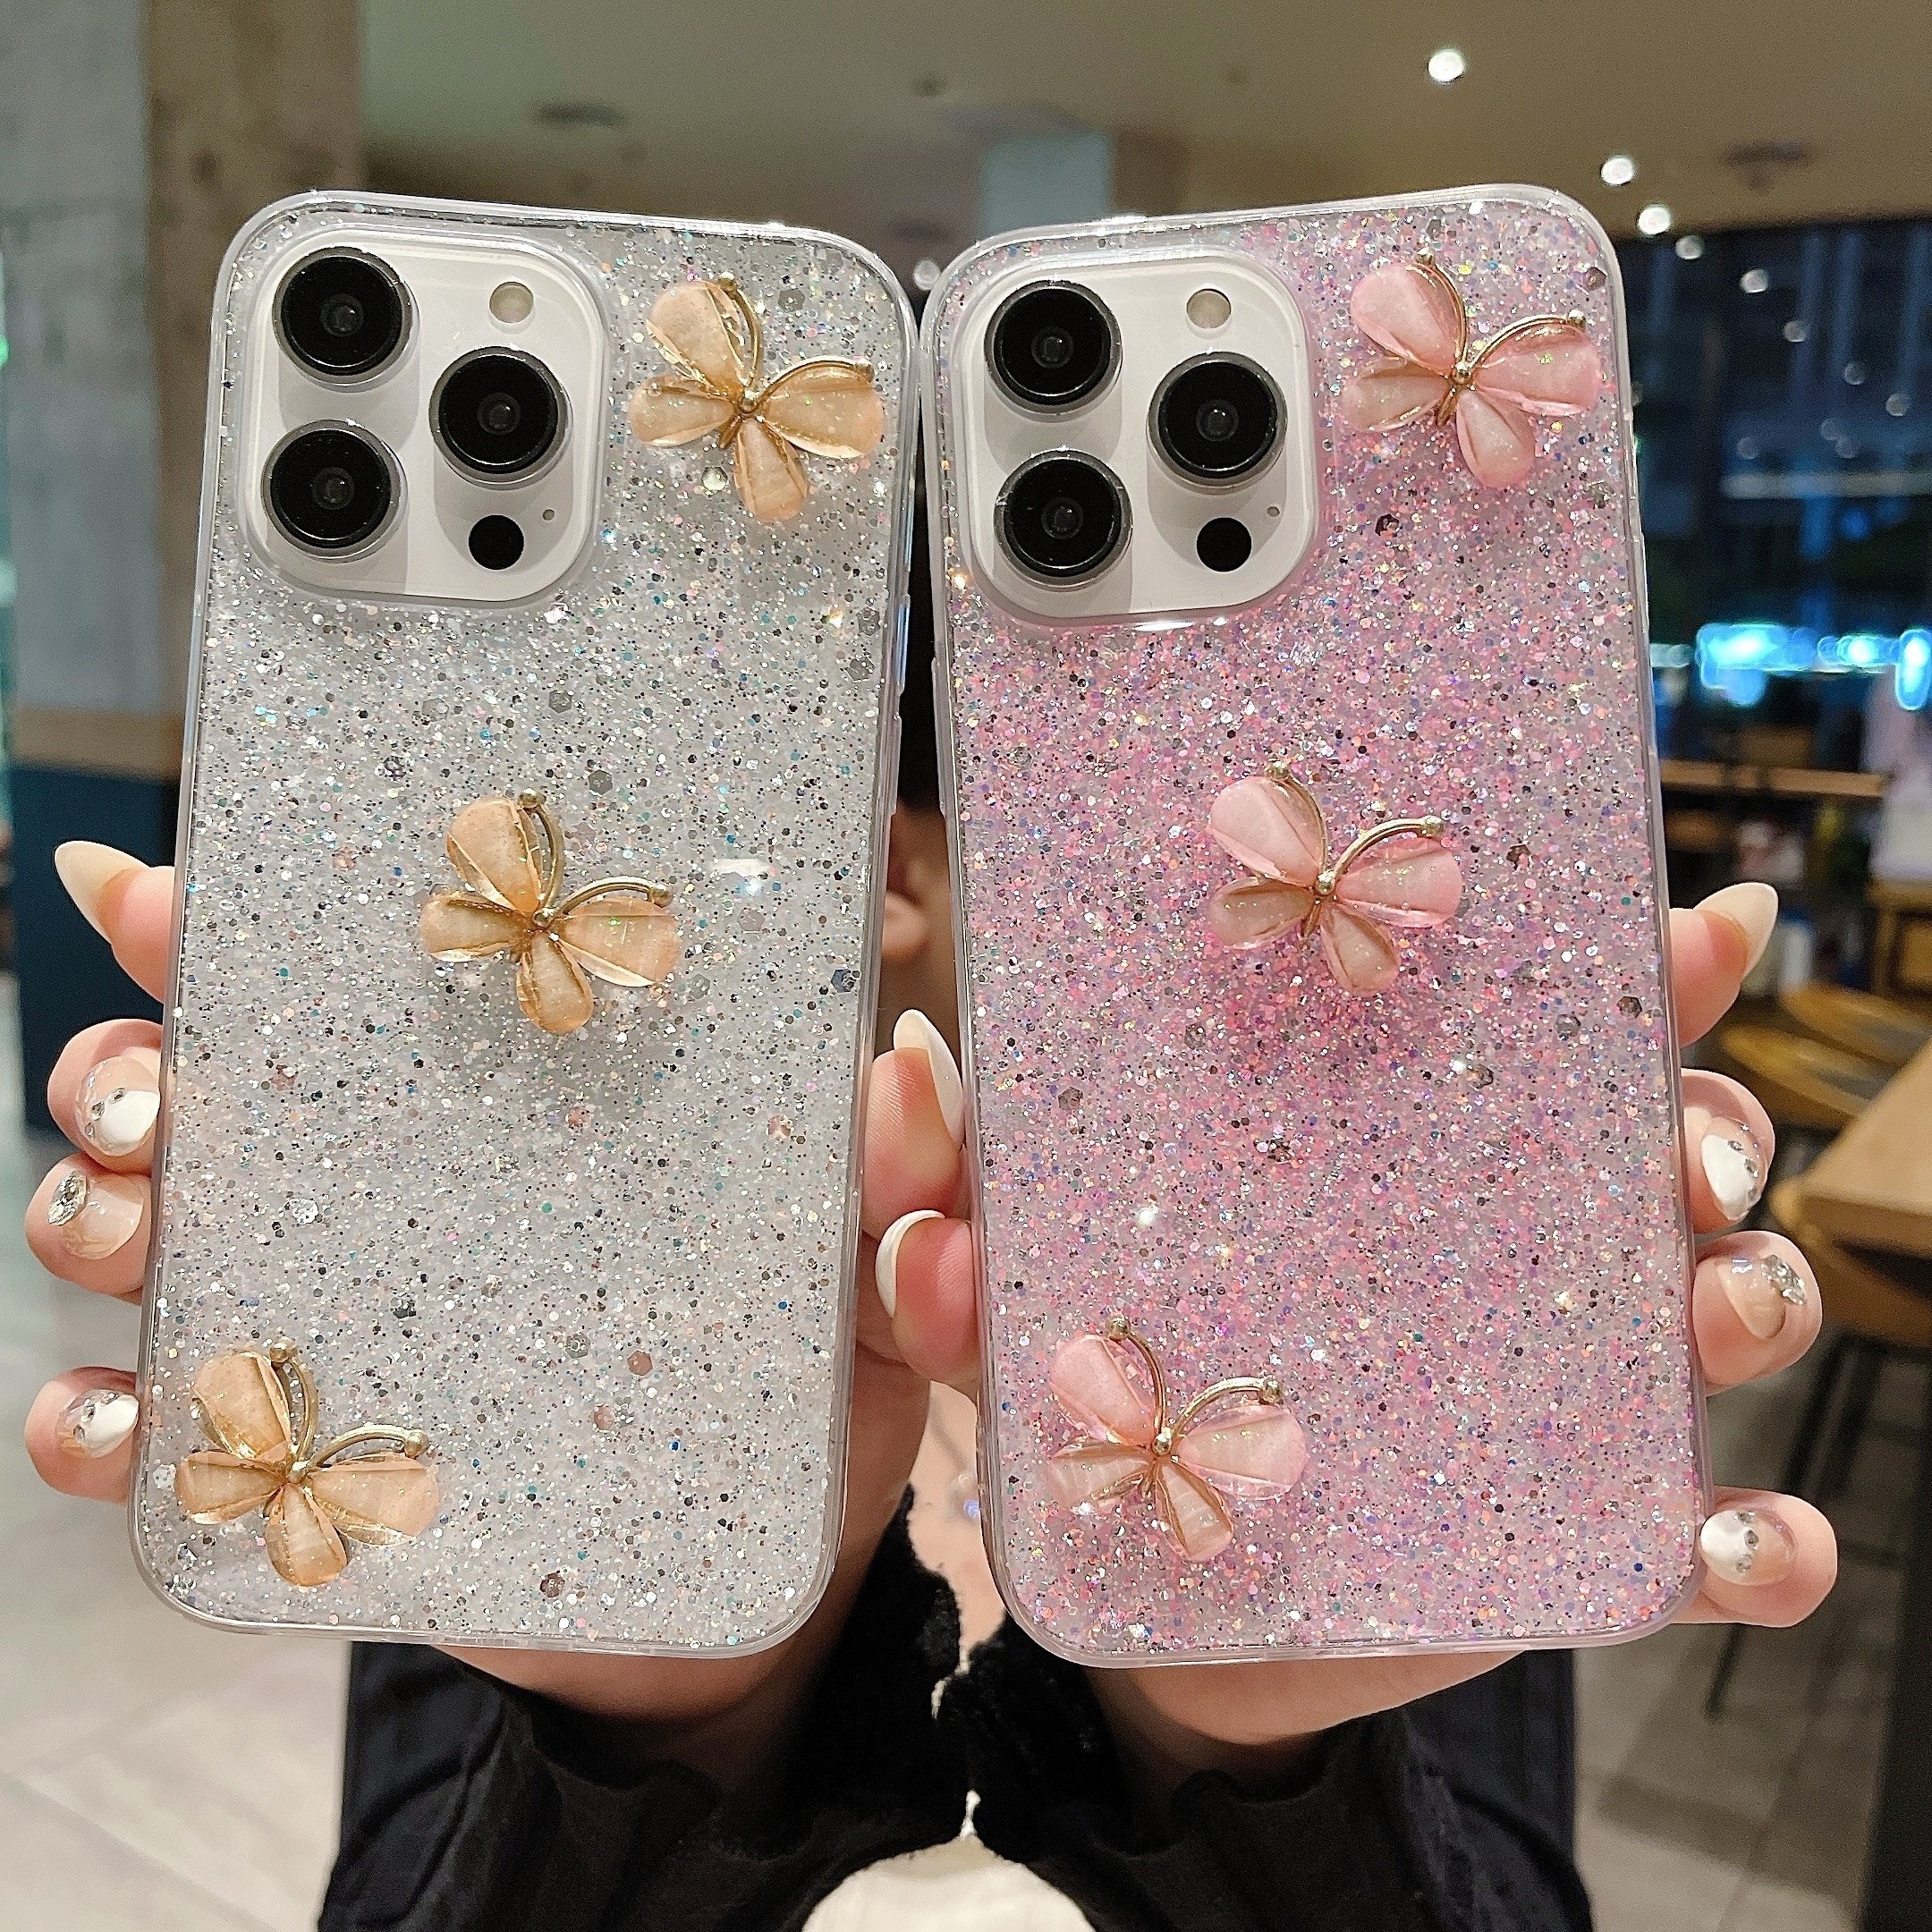 Glitter Case for iPhone 8 7 6s Plus SE 2020 Diamond Rainbow Case For iPhone  12 mini 11 Pro XS Max XR X Soft Silicone Girl Cover - AliExpress